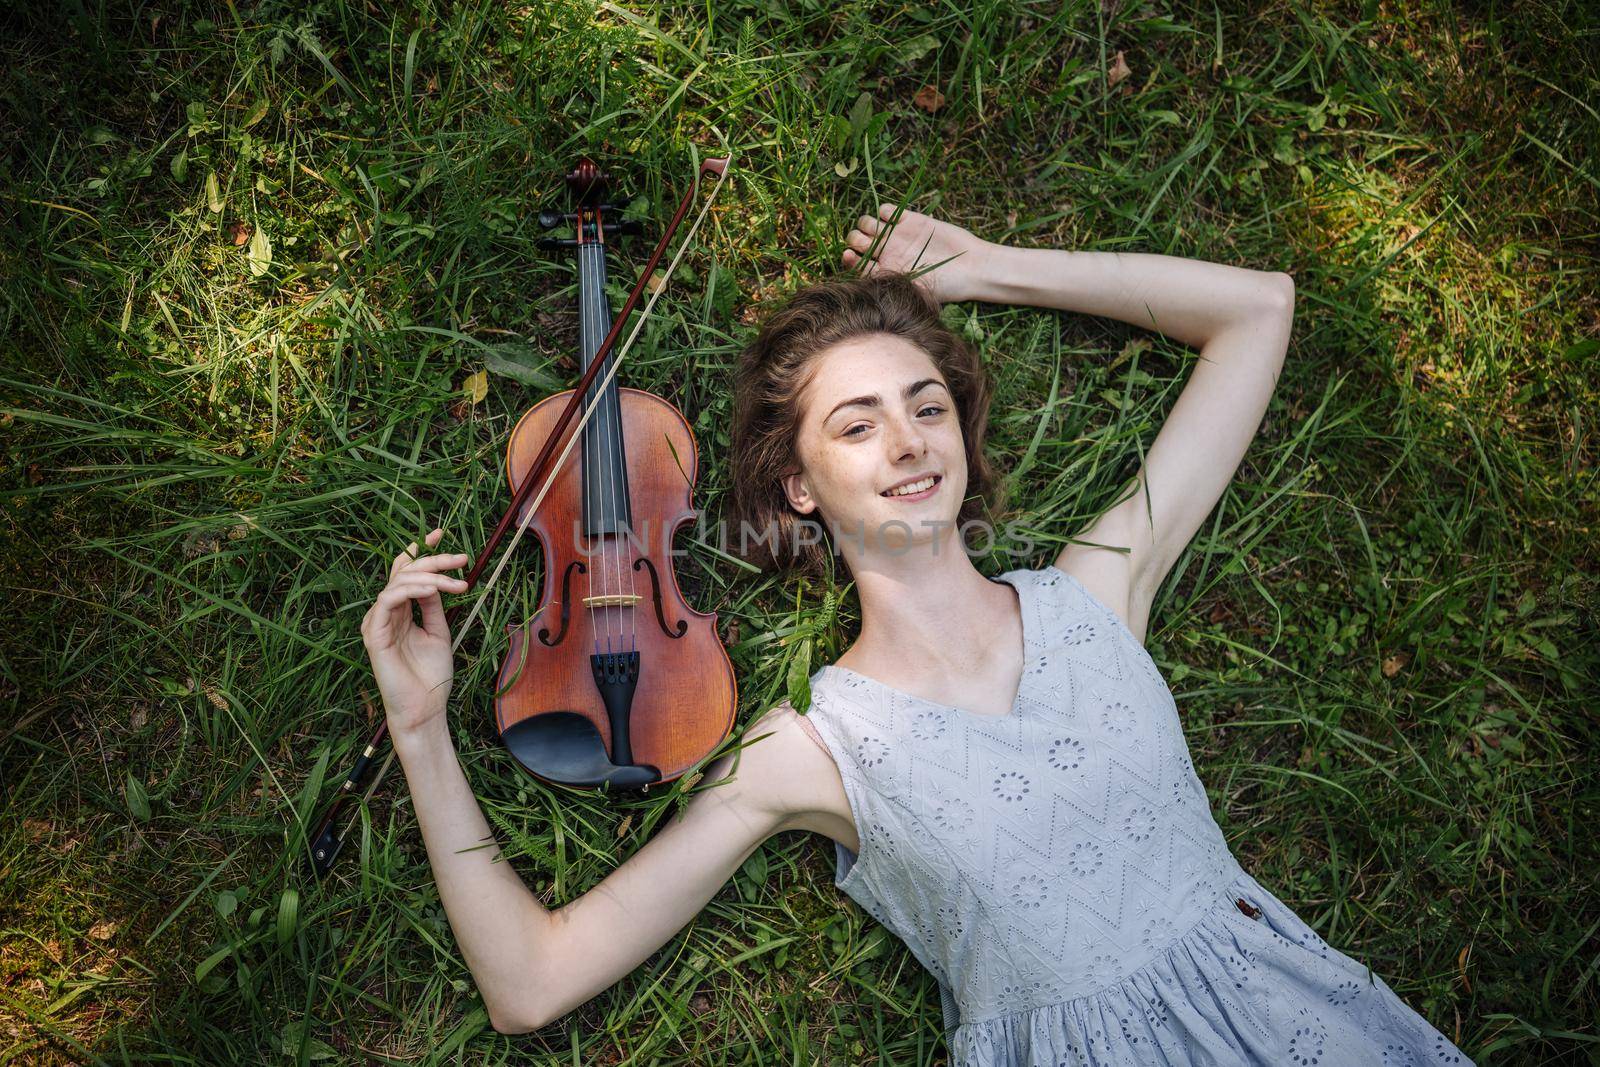 The girl lies with a violin on the grass in a city park. by DovidPro